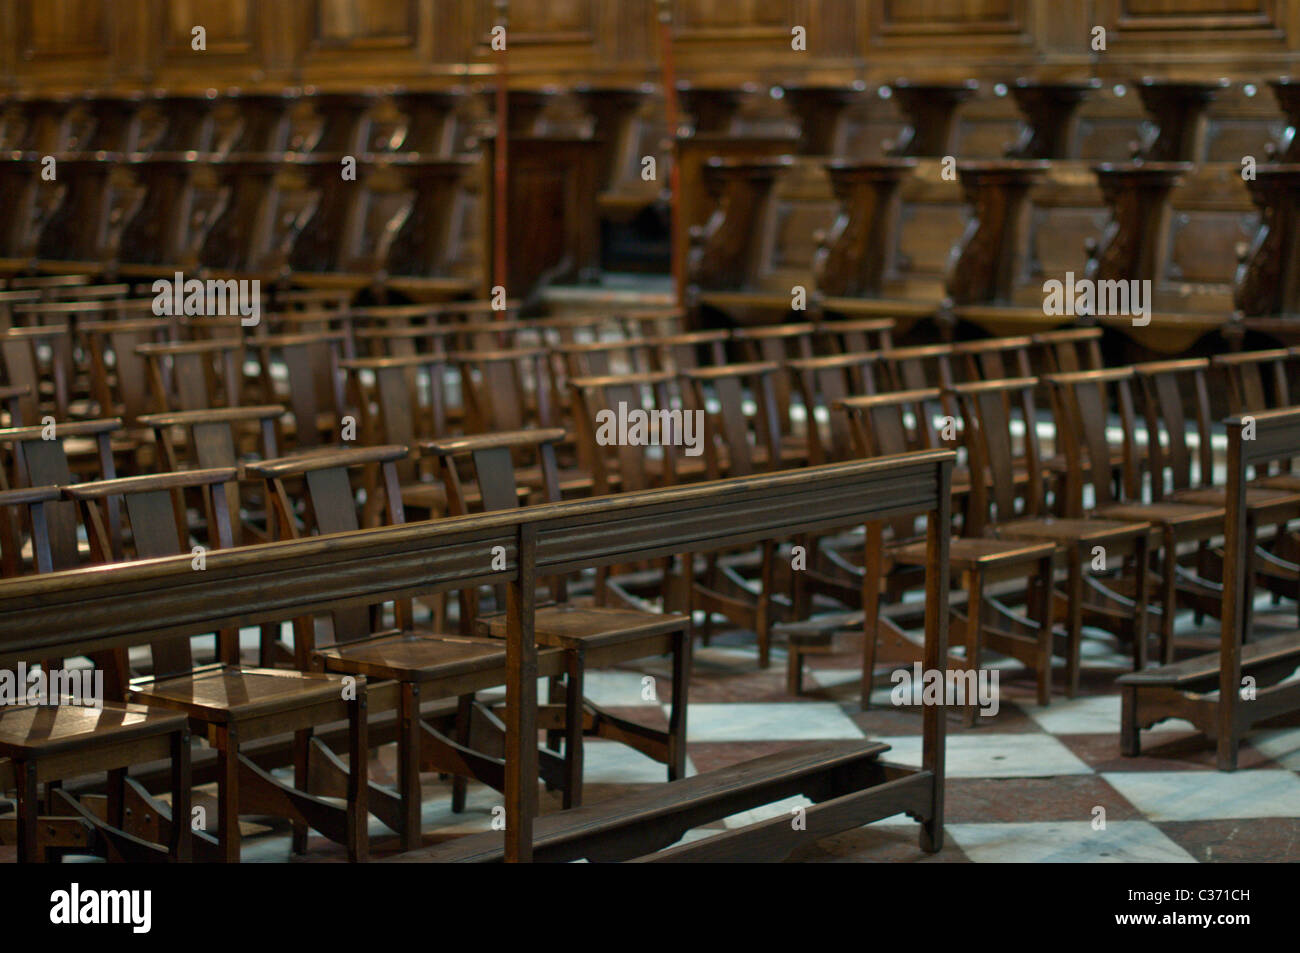 Rows of seats and choir stalls, Narbonne Cathedral Stock Photo